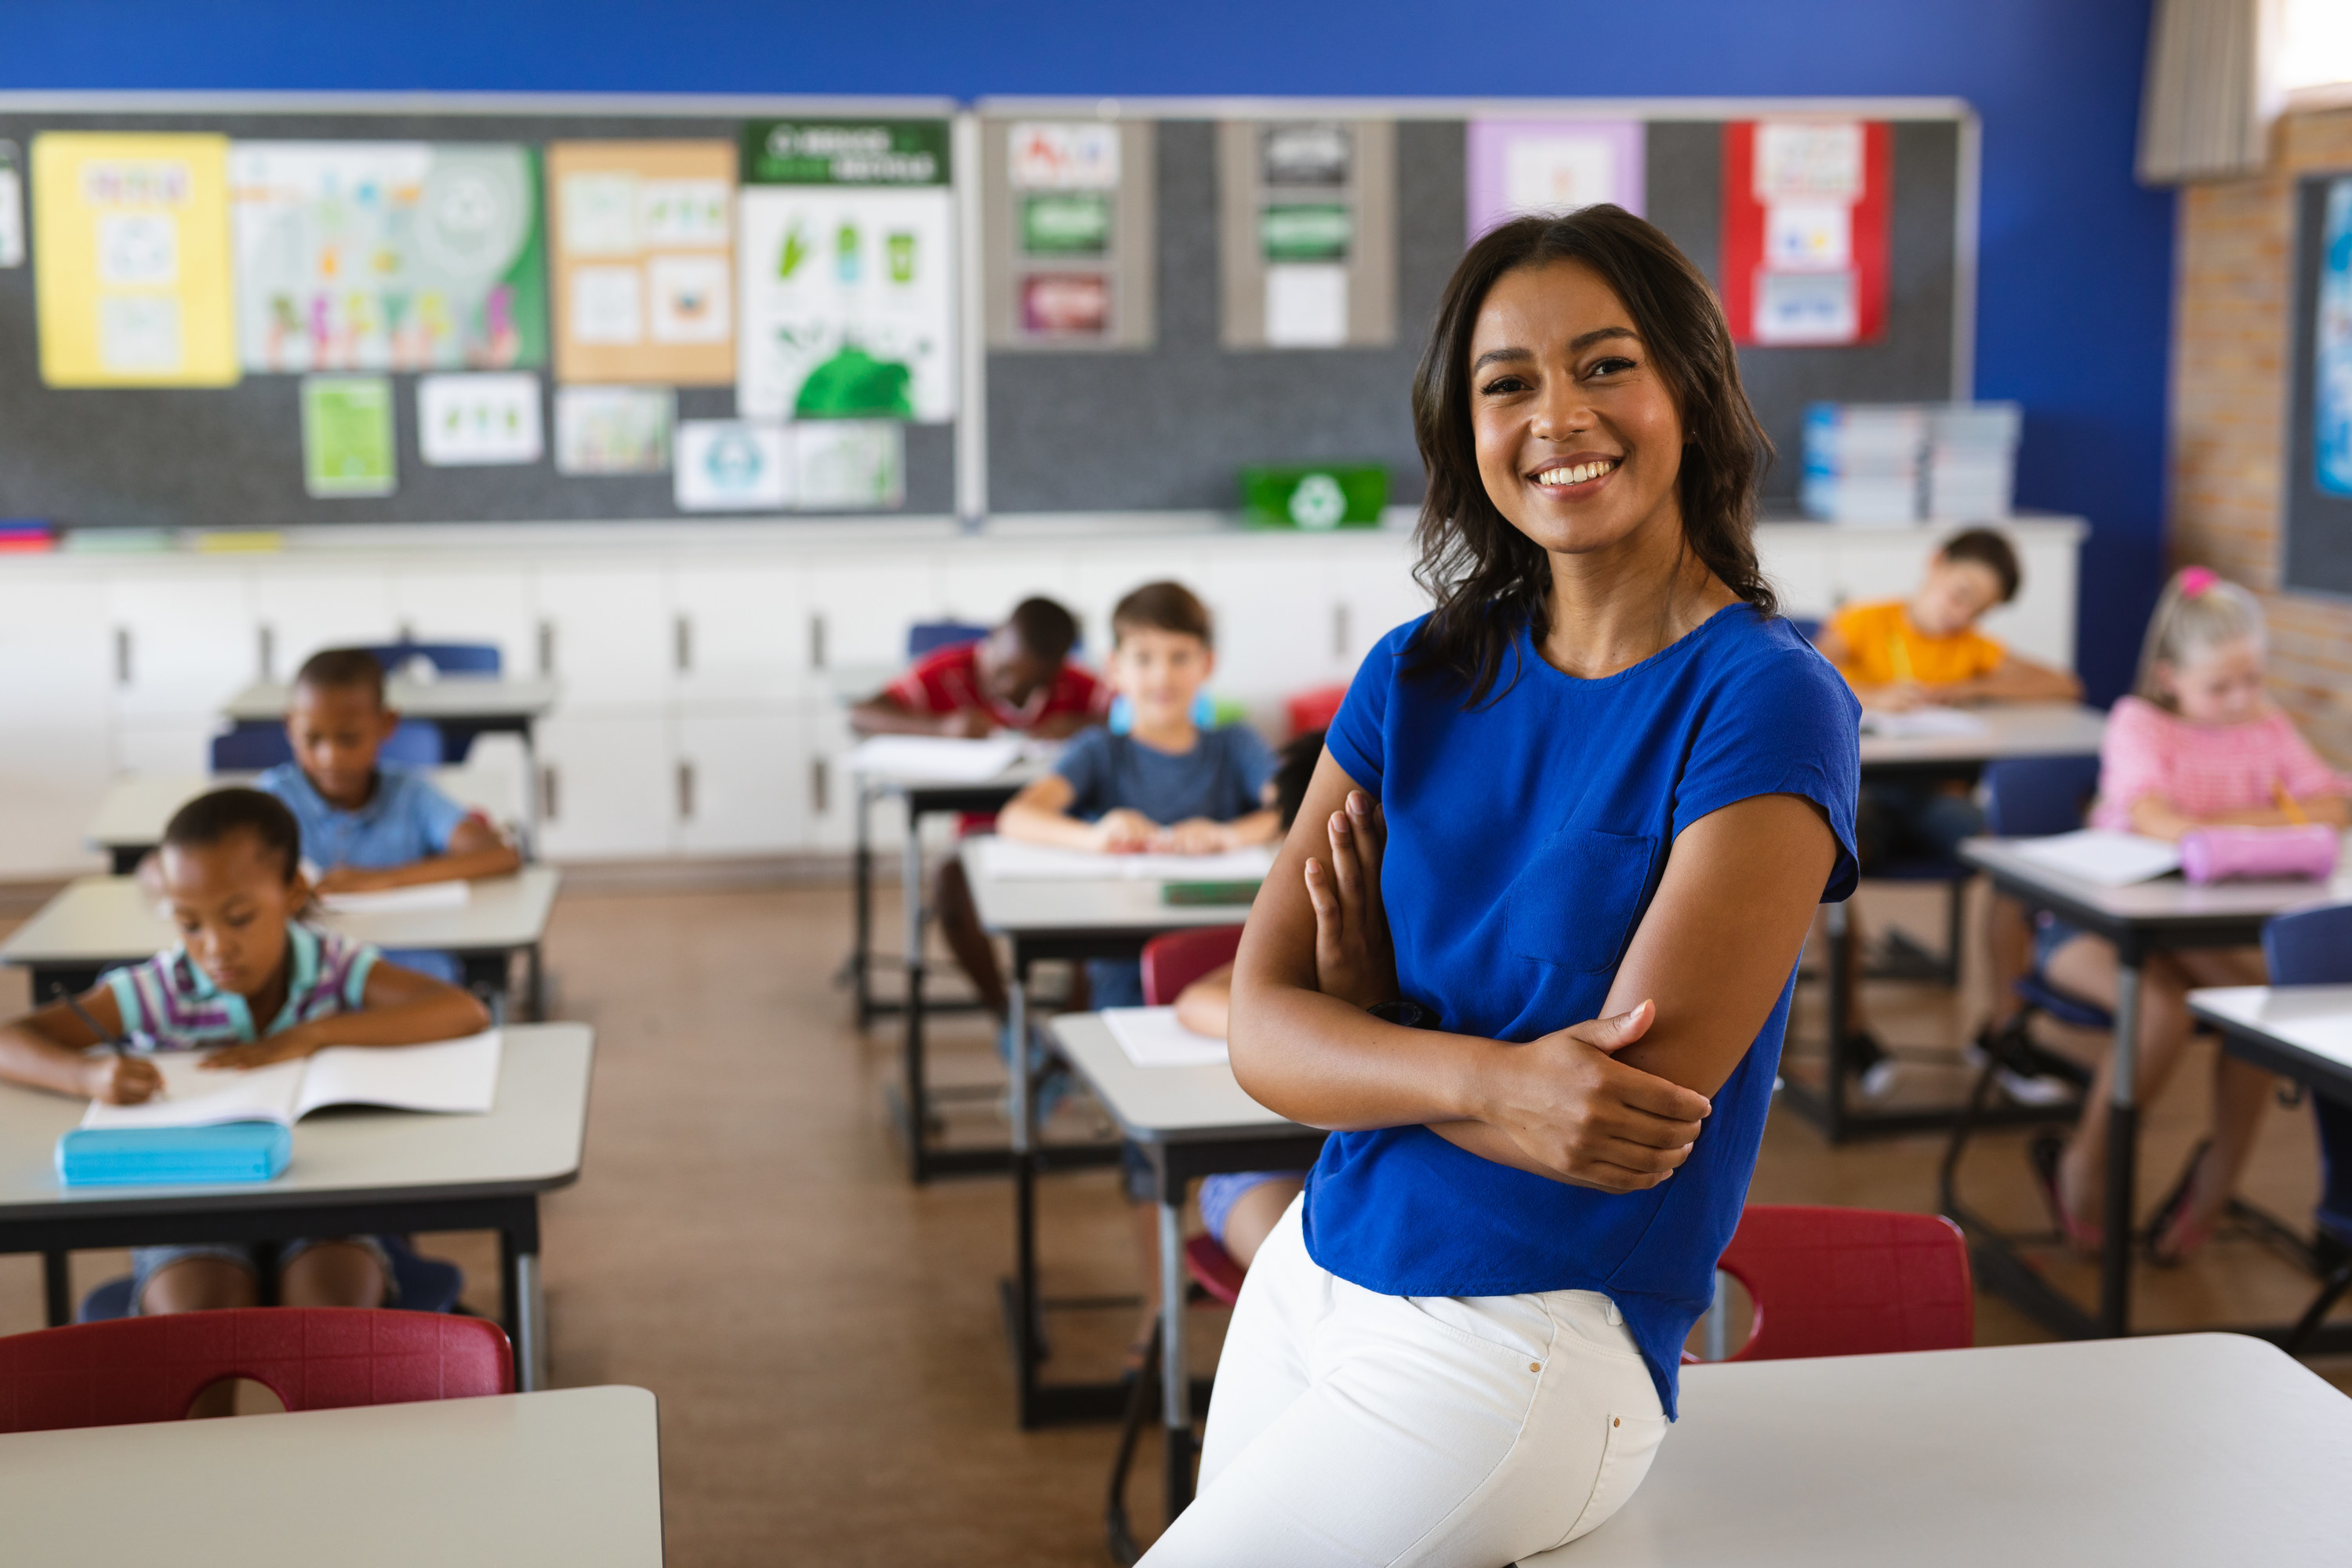 Teacher smiling in a classroom with students in the background